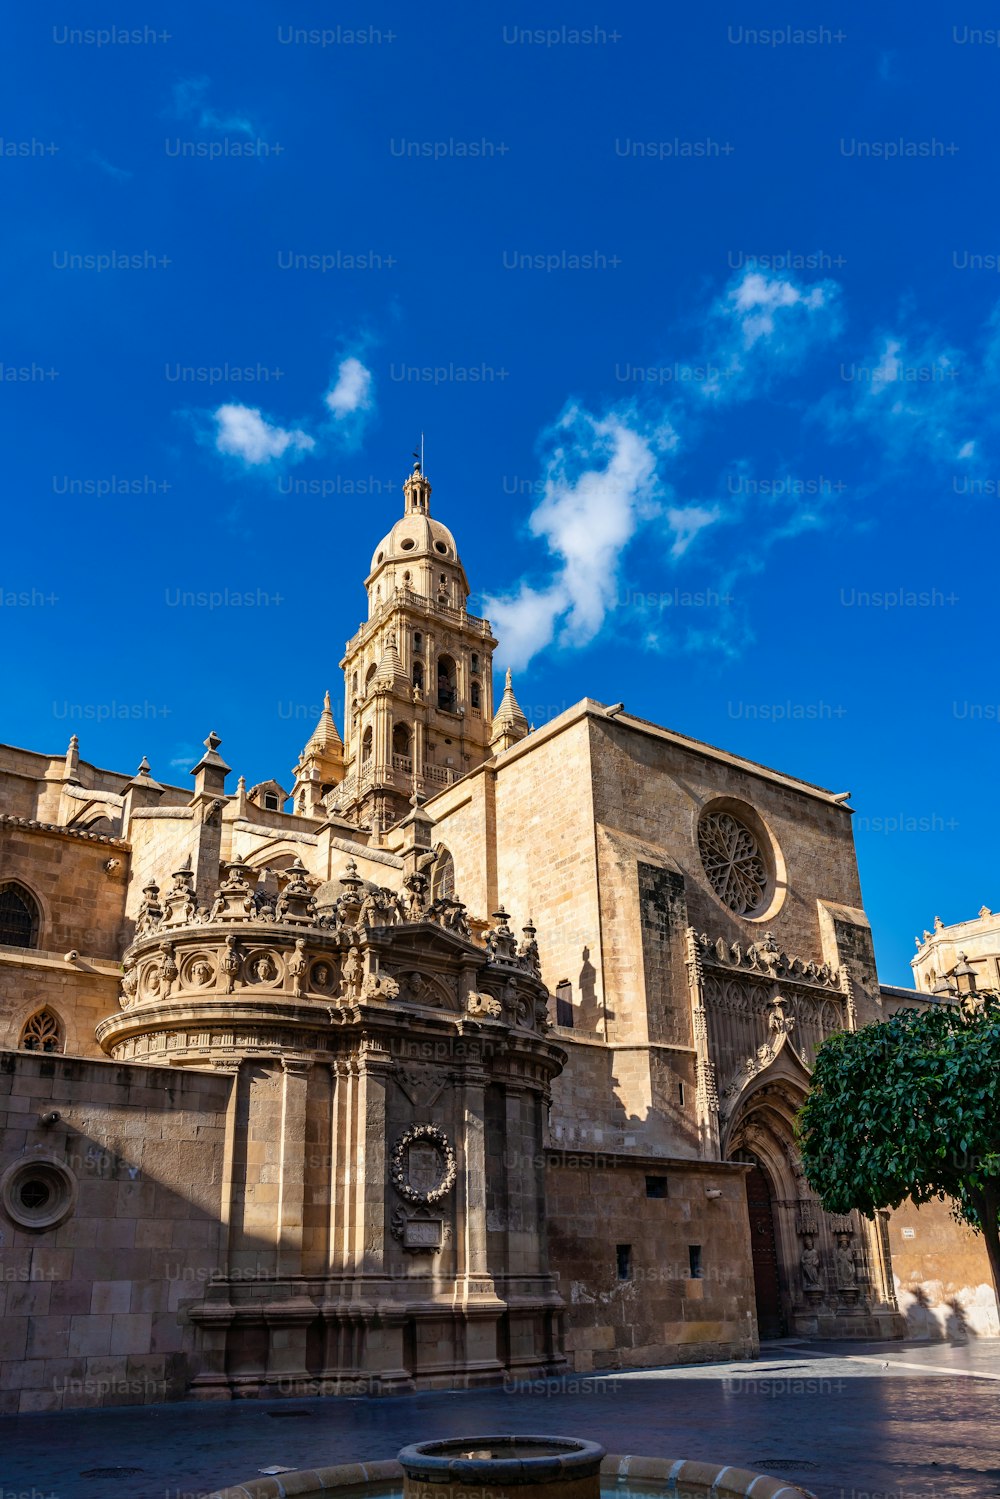 Cathedral Church of Saint Mary, La Santa Iglesia Catedral de Santa Maria in Murcia, Spain. A mixture of gothic and baroque style.